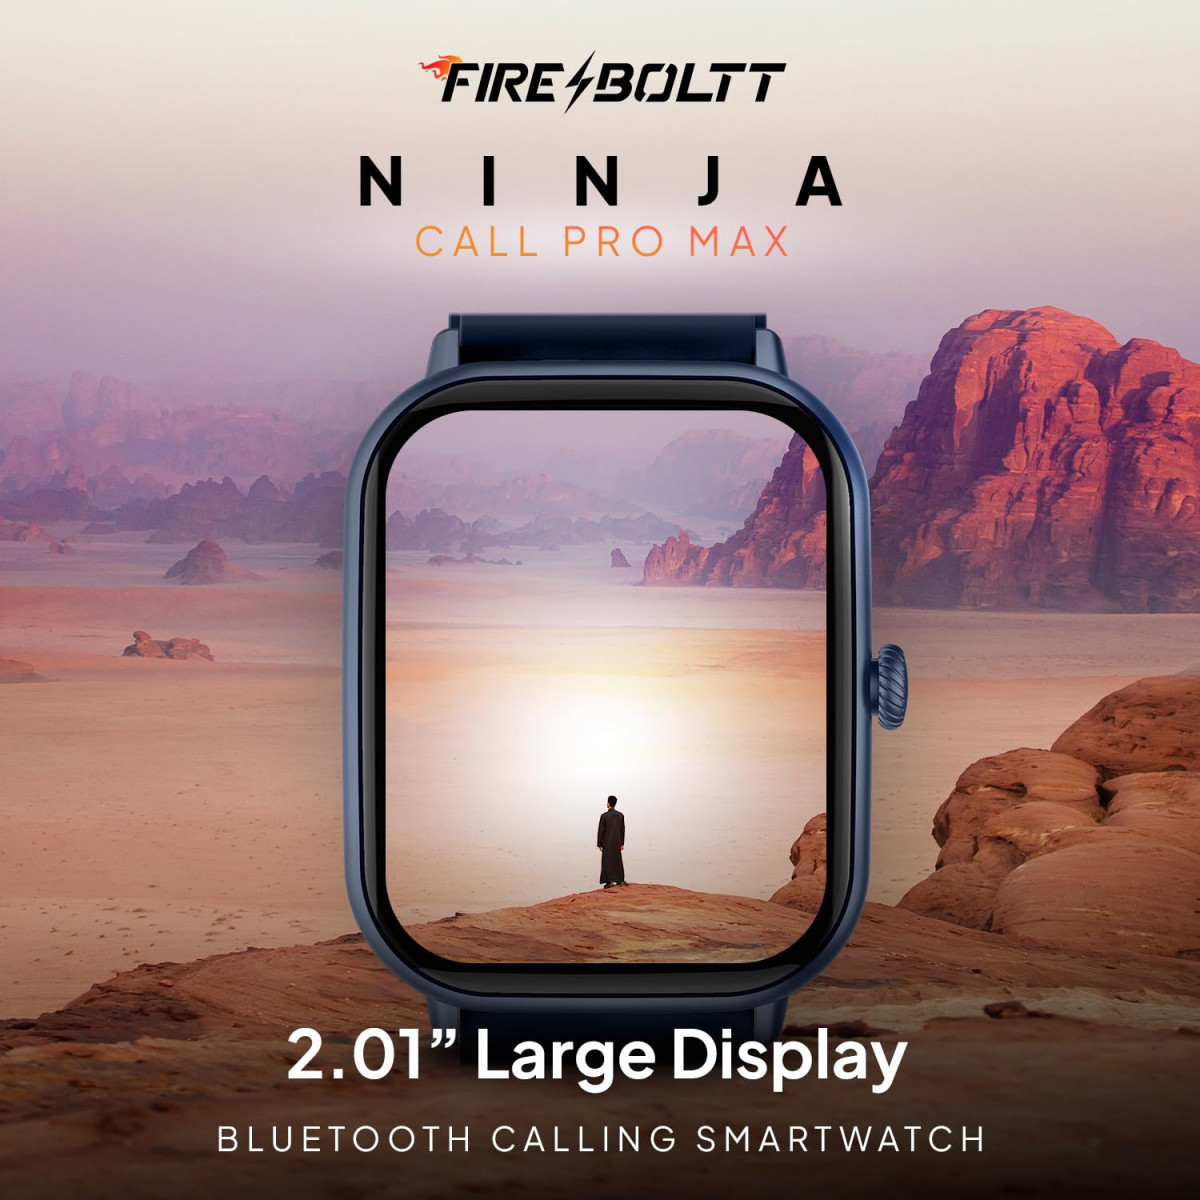 Fire-Boltt Ninja Call Pro Max 201 Display Smart Watch Bluetooth Calling 120 Sports Modes Health Suite Voice Assistance